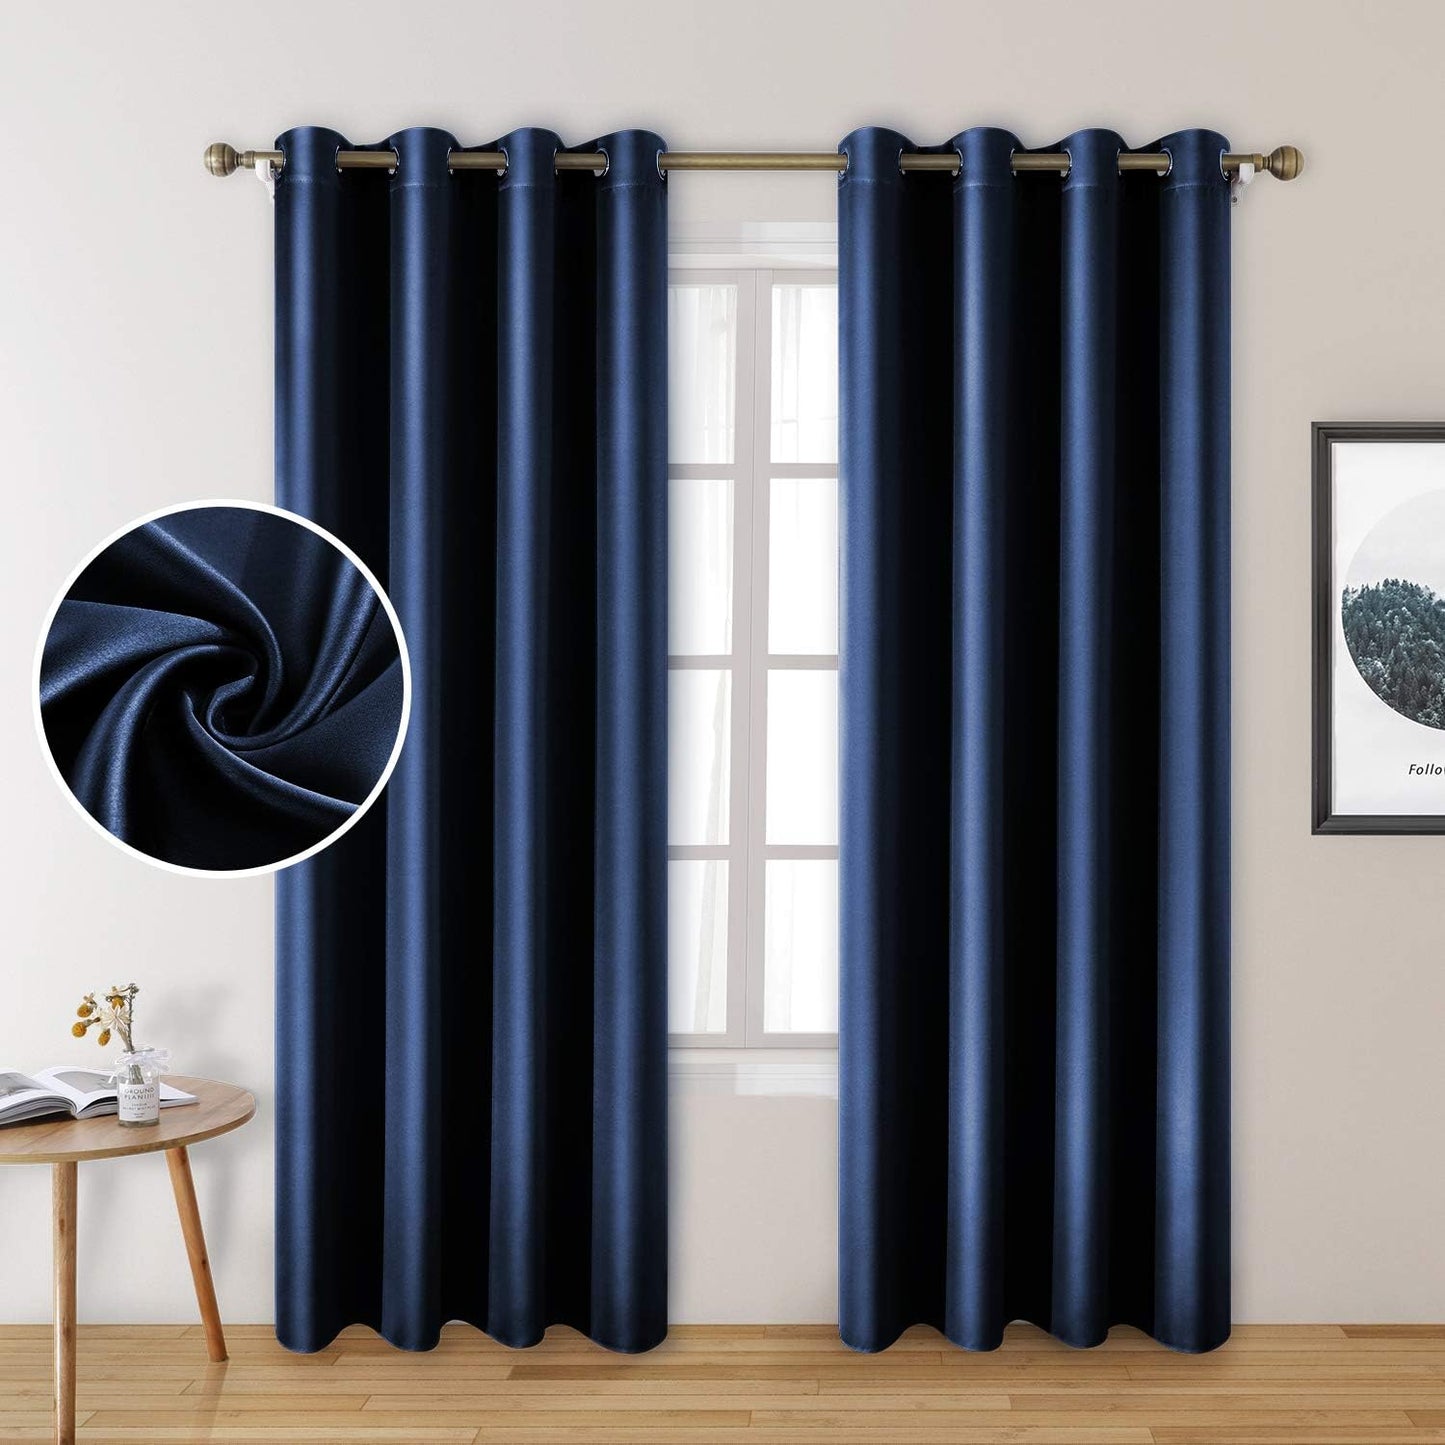 HOMEIDEAS Gold Blackout Curtains, Faux Silk for Bedroom 52 X 84 Inch Room Darkening Satin Thermal Insulated Drapes for Window, Indoor, Living Room, 2 Panels  HOMEIDEAS Navy Blue 52" X 84" 